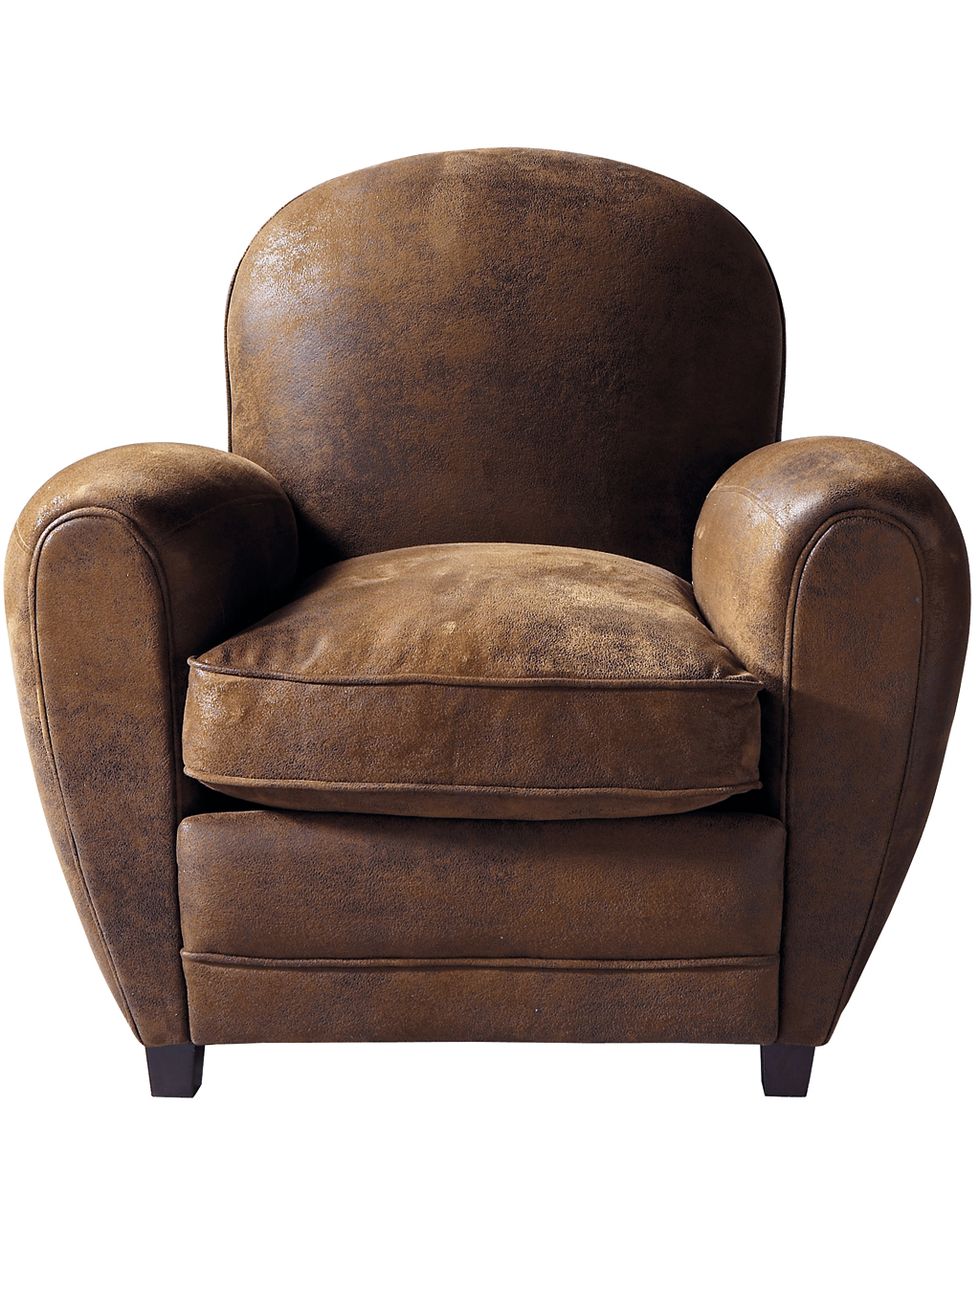 Club chair, Furniture, Chair, Brown, Leather, Couch, Futon pad, Armrest, 